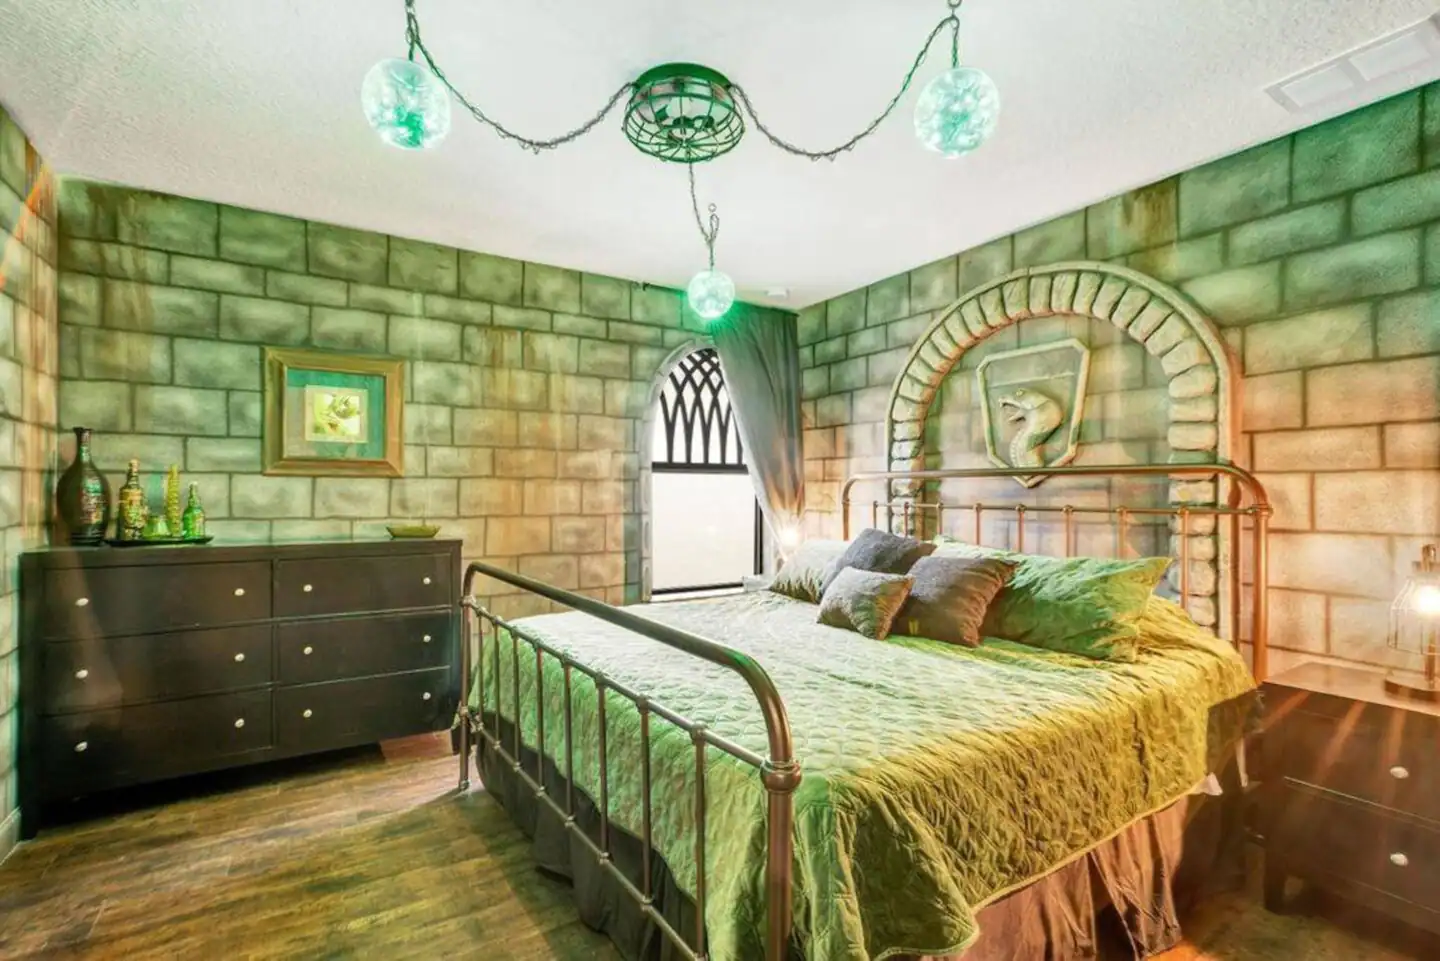 Second story | King bed | Jack and Jill bathroom attached | Special lighting effects